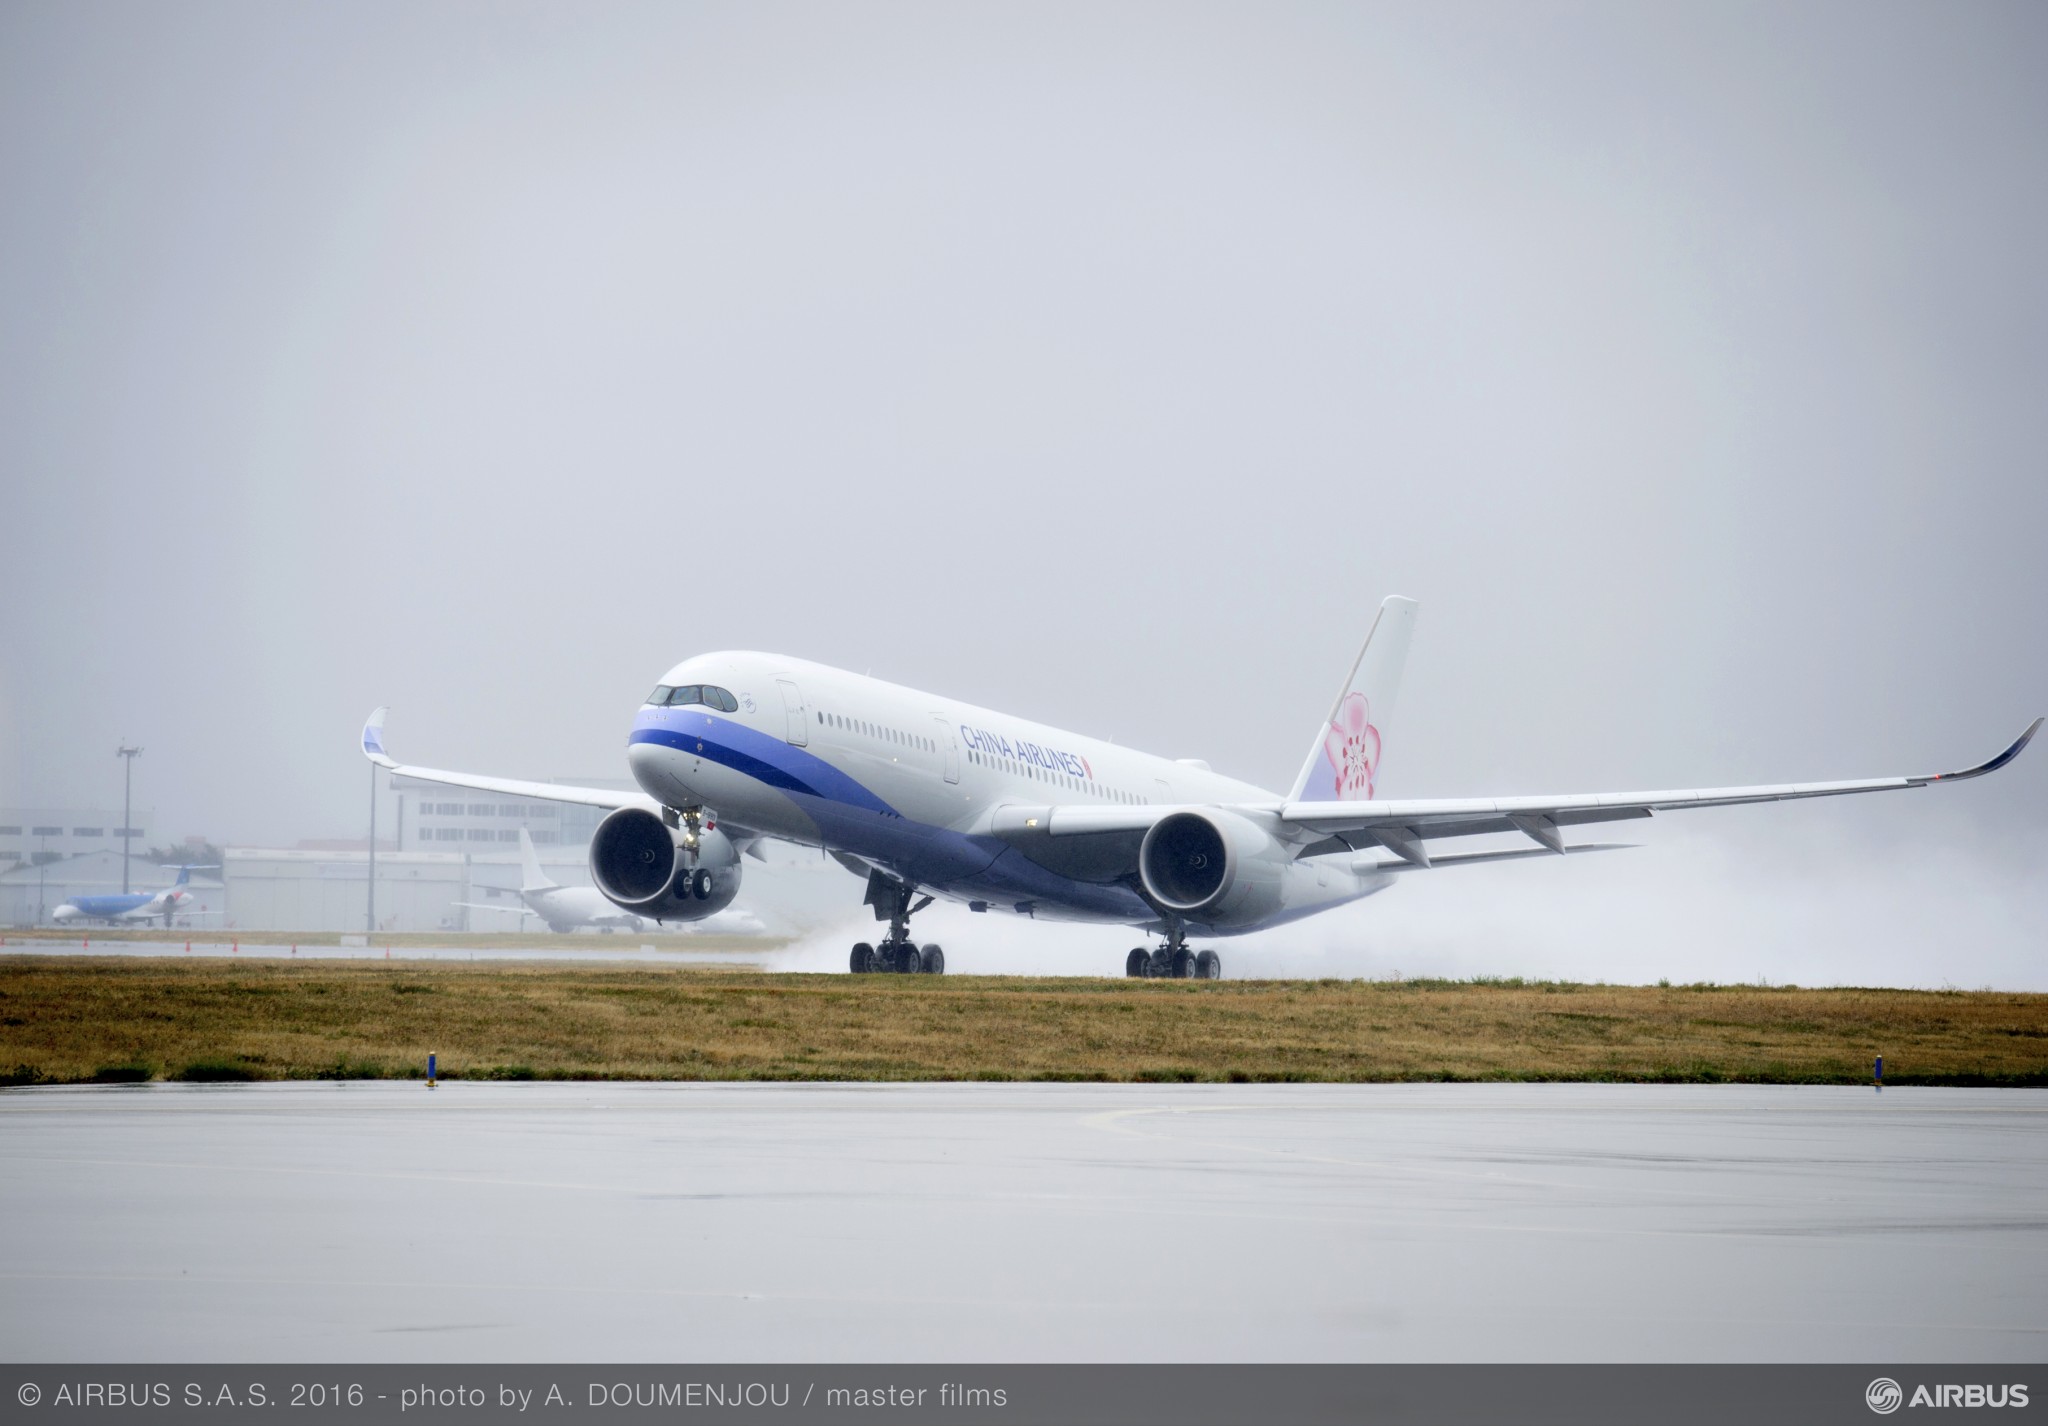 Chinese Airlines: Expect stronger Big-3 post pandemic, says HSBC